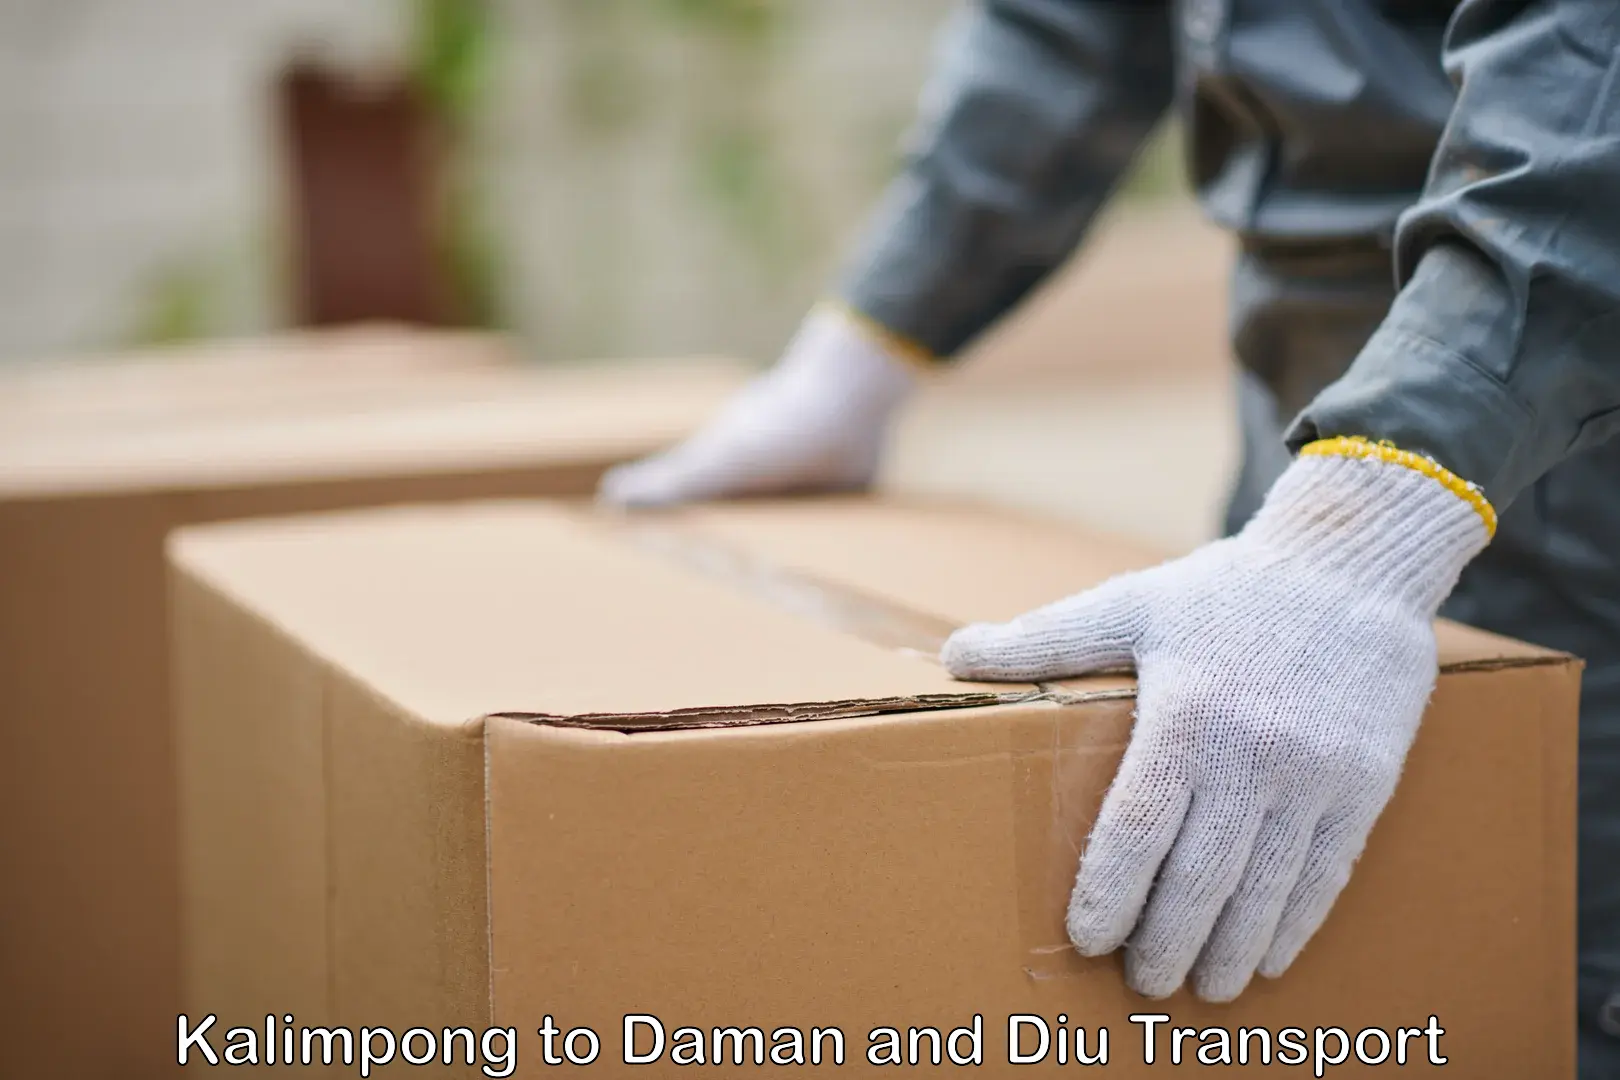 Commercial transport service Kalimpong to Daman and Diu